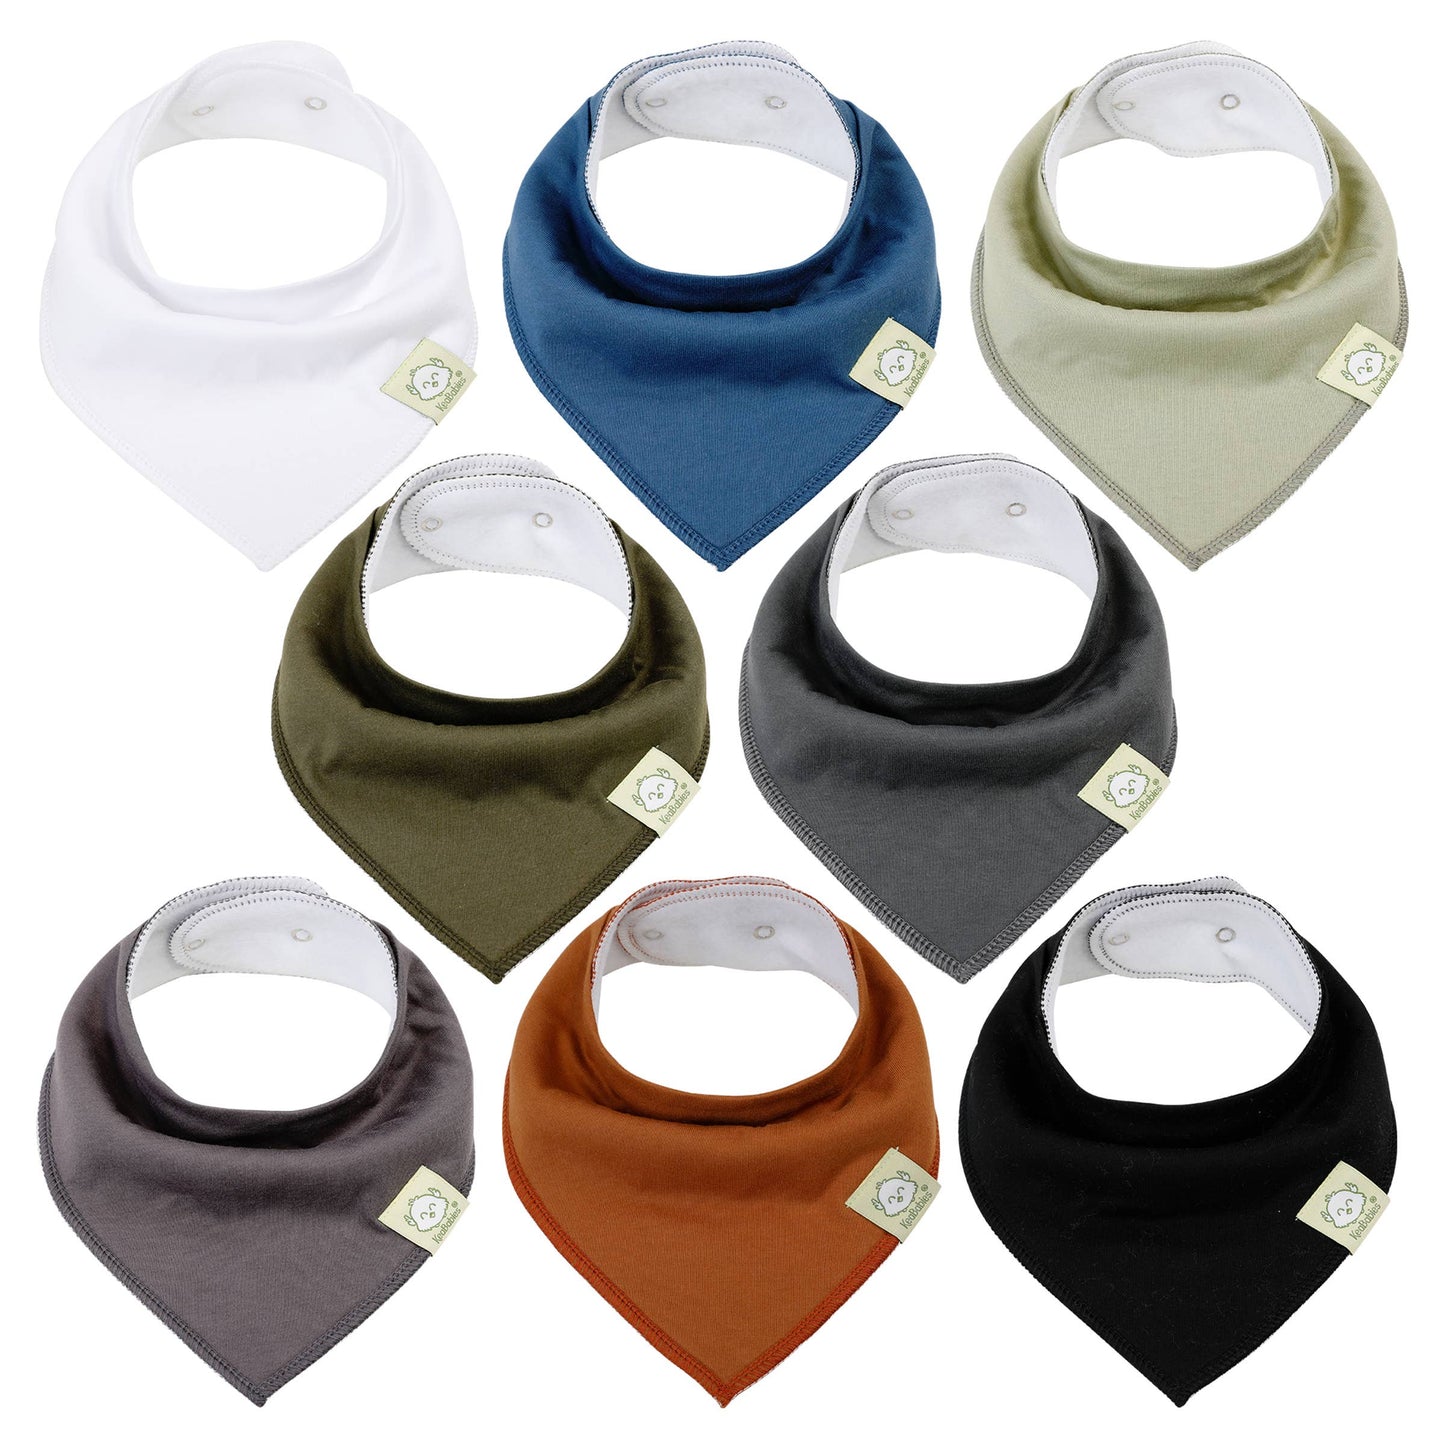 8-Pack Baby Bibs, Basic Solids